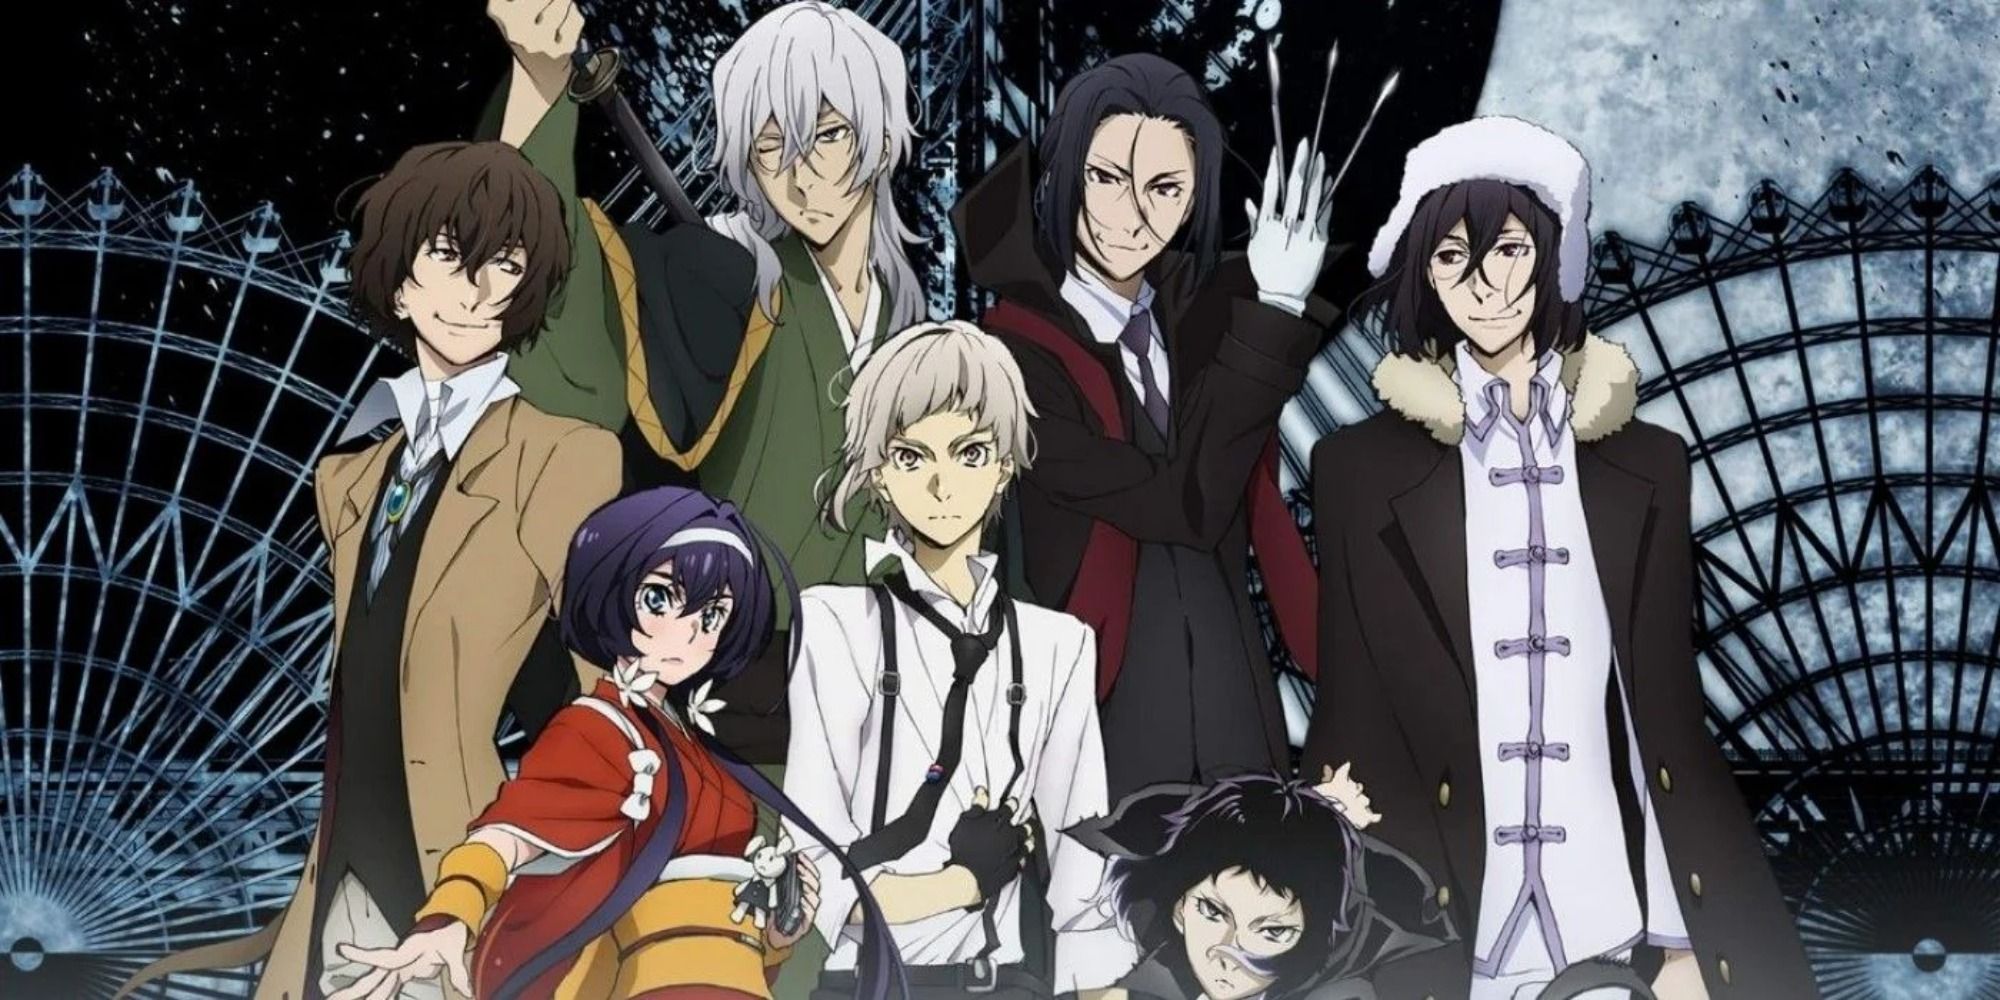 Bungou Stray Dogs Anime Character Designs Accompanied by Expanded Staff  List  Crunchyroll News